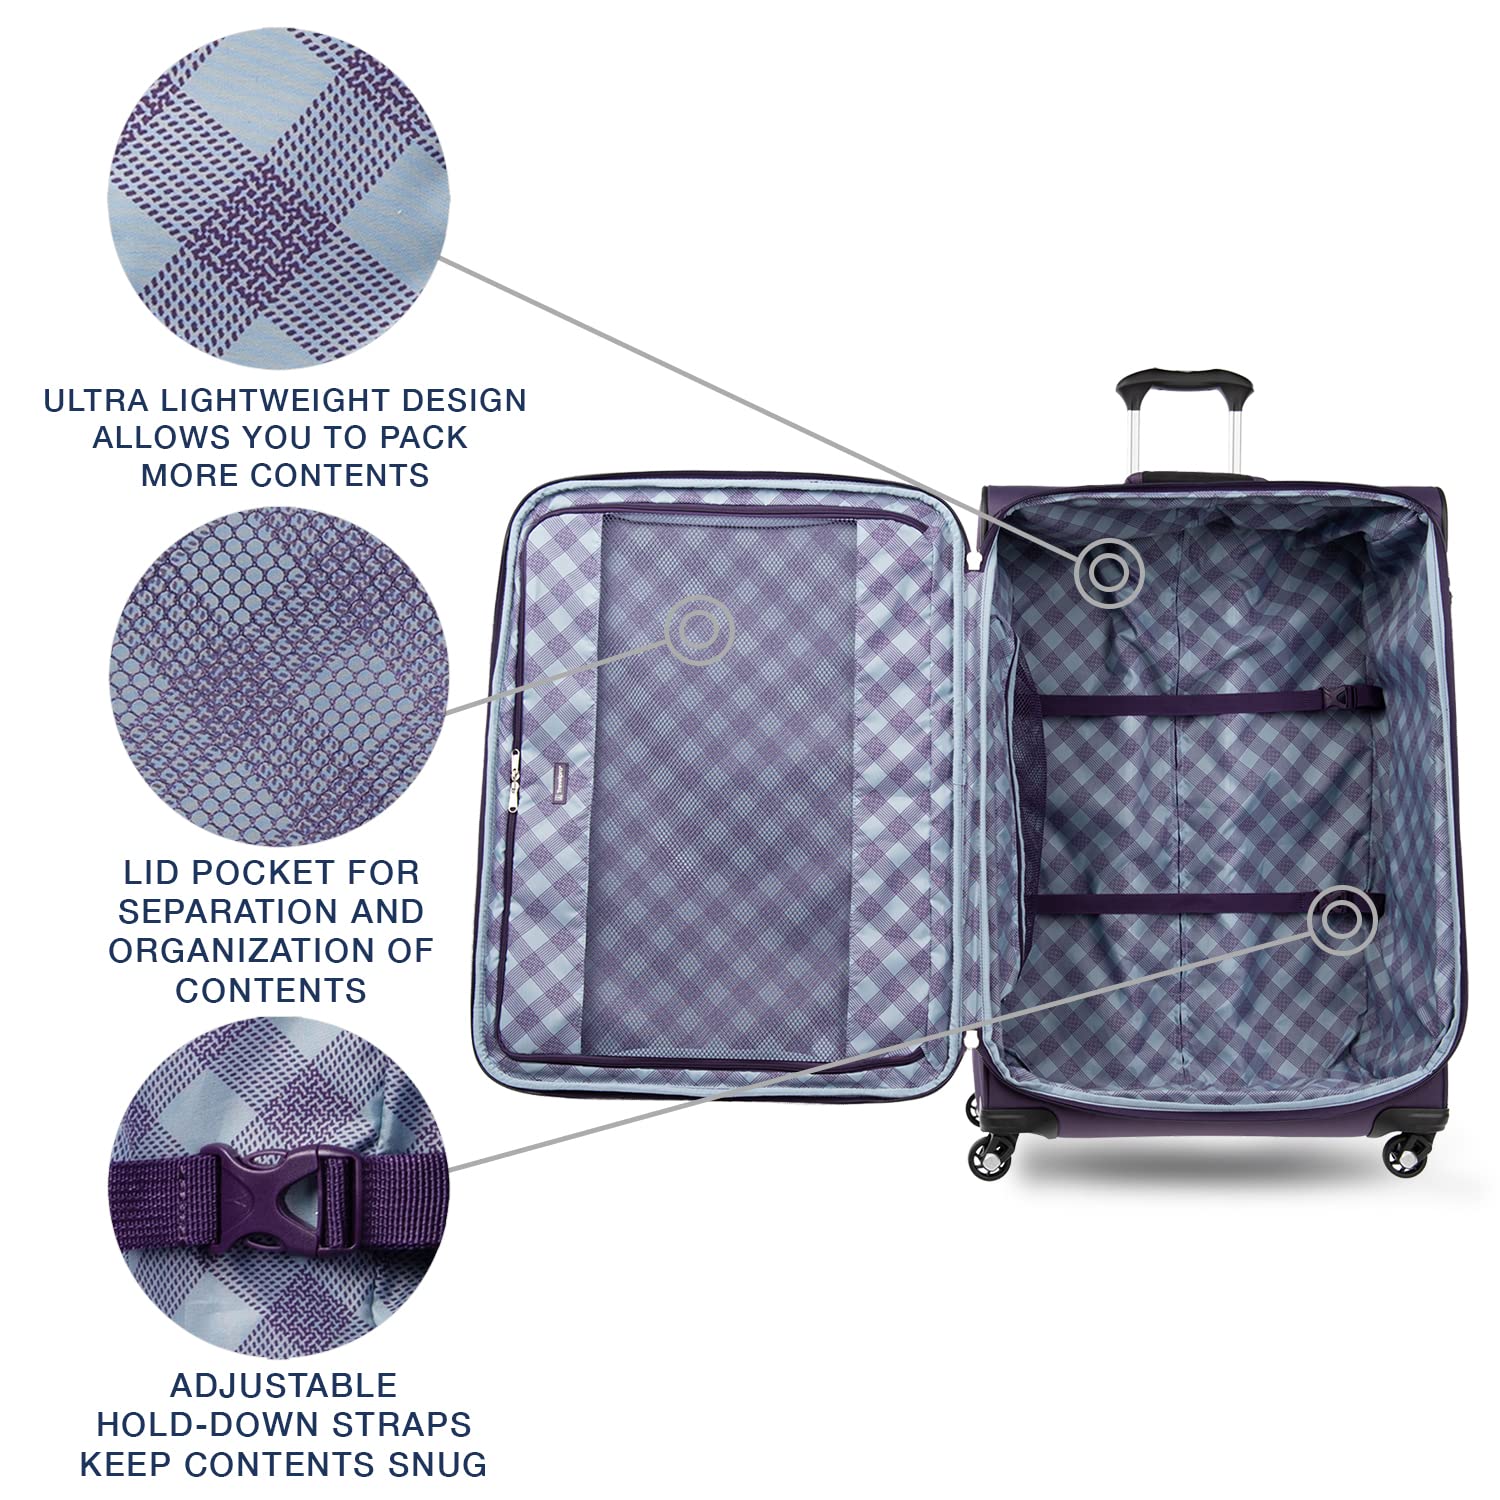 Travelpro Maxlite 5 Softside Expandable Luggage with 4 Spinner Wheels, Lightweight Suitcase, Men and Women U1